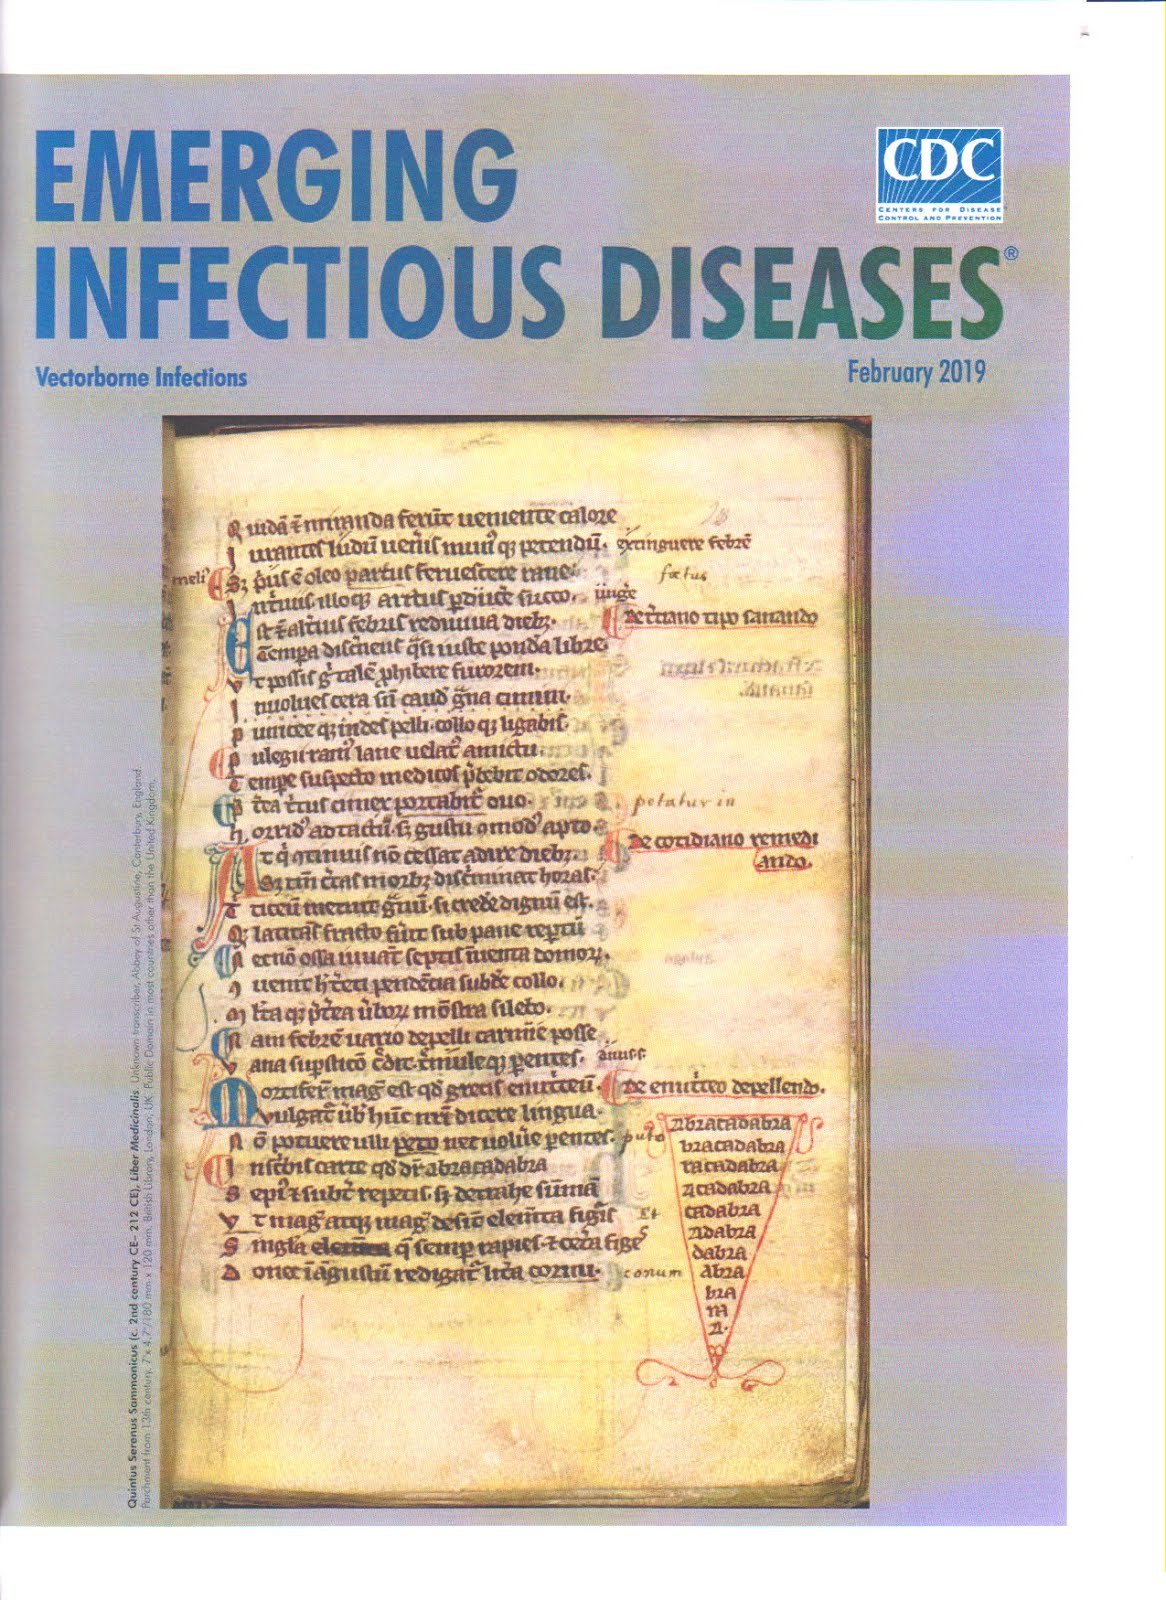 CDC: Emerging Infectious Diseases [February 2019]